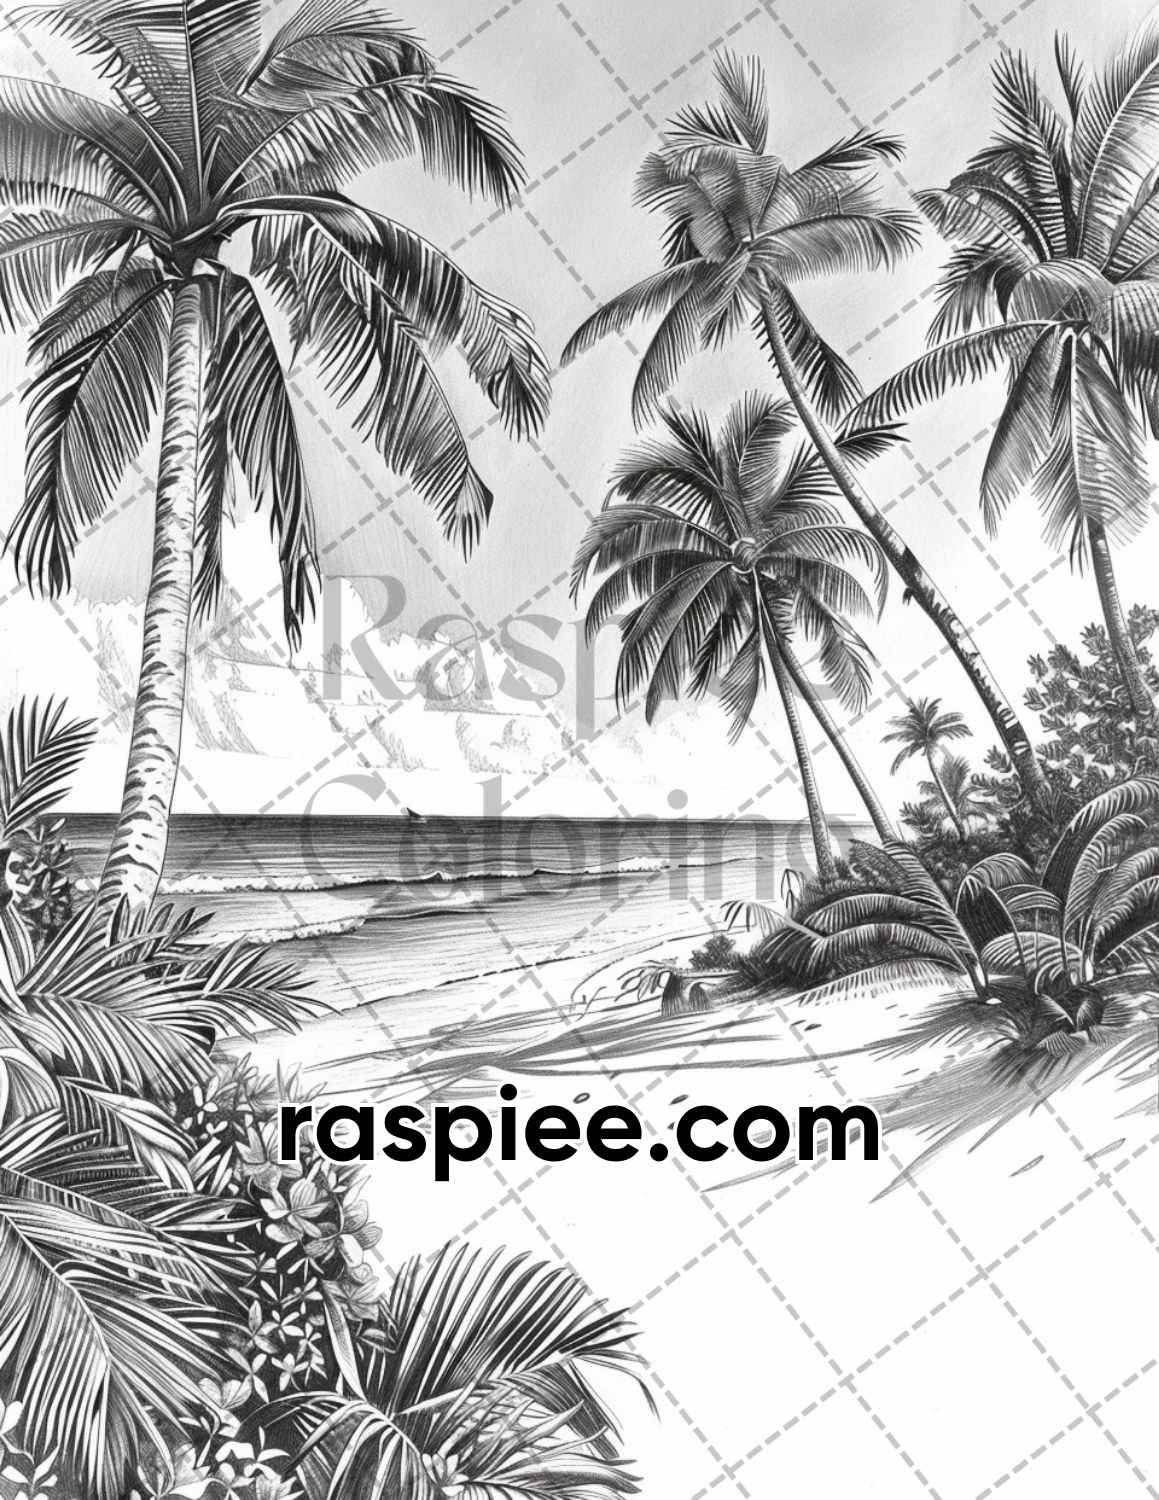 adult coloring pages, adult coloring sheets, adult coloring book pdf, adult coloring book printable, grayscale coloring pages, grayscale coloring books, grayscale illustration, summer adult coloring pages, summer adult coloring book, landscapes Adult Coloring Pages